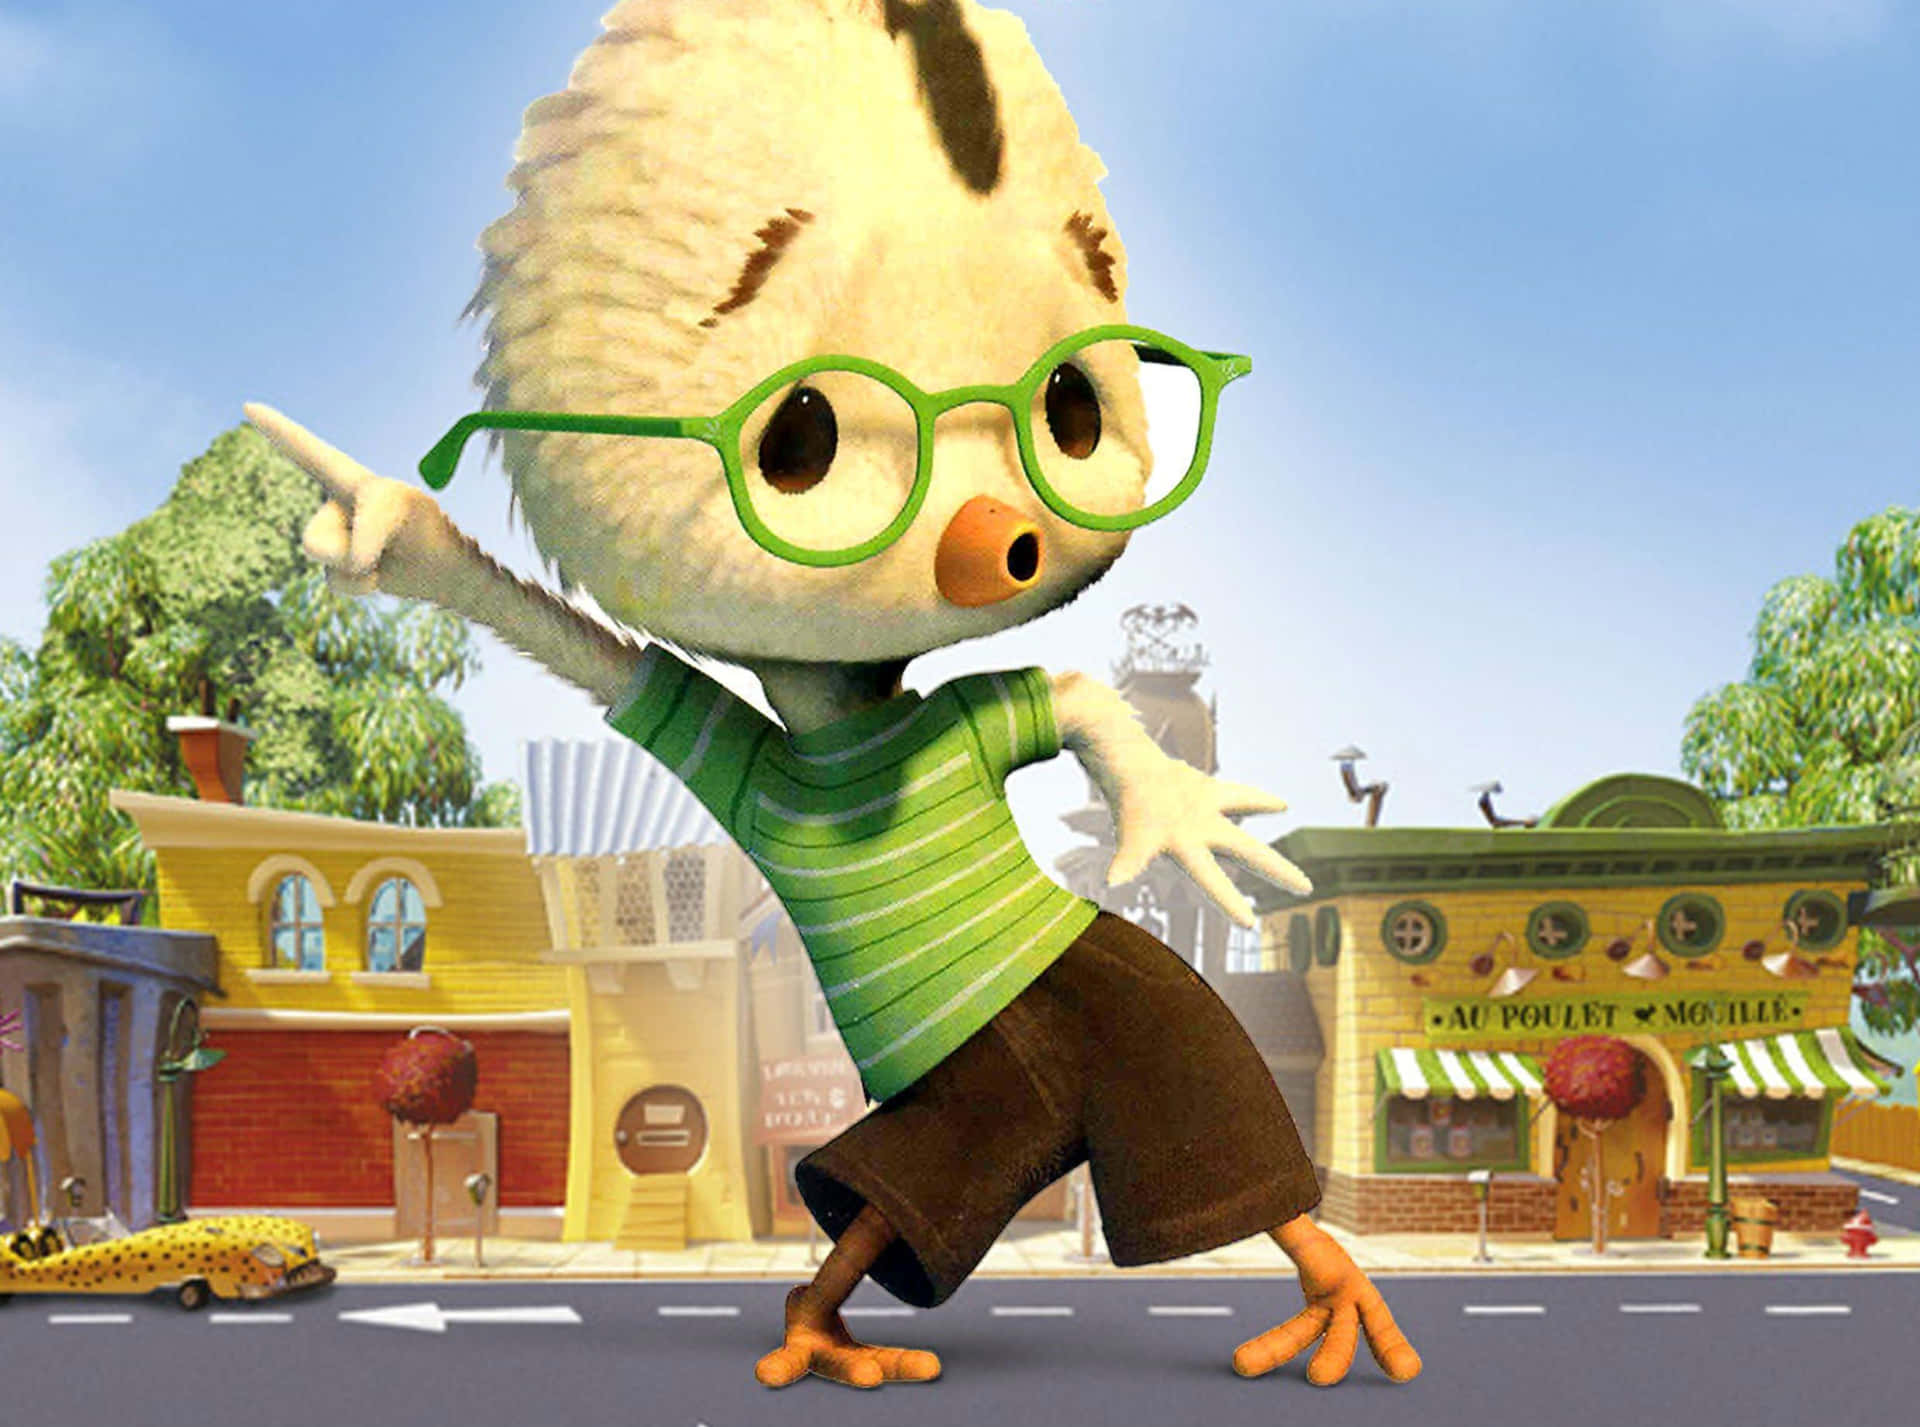 A Cartoon Bird In Glasses Is Standing On A Street